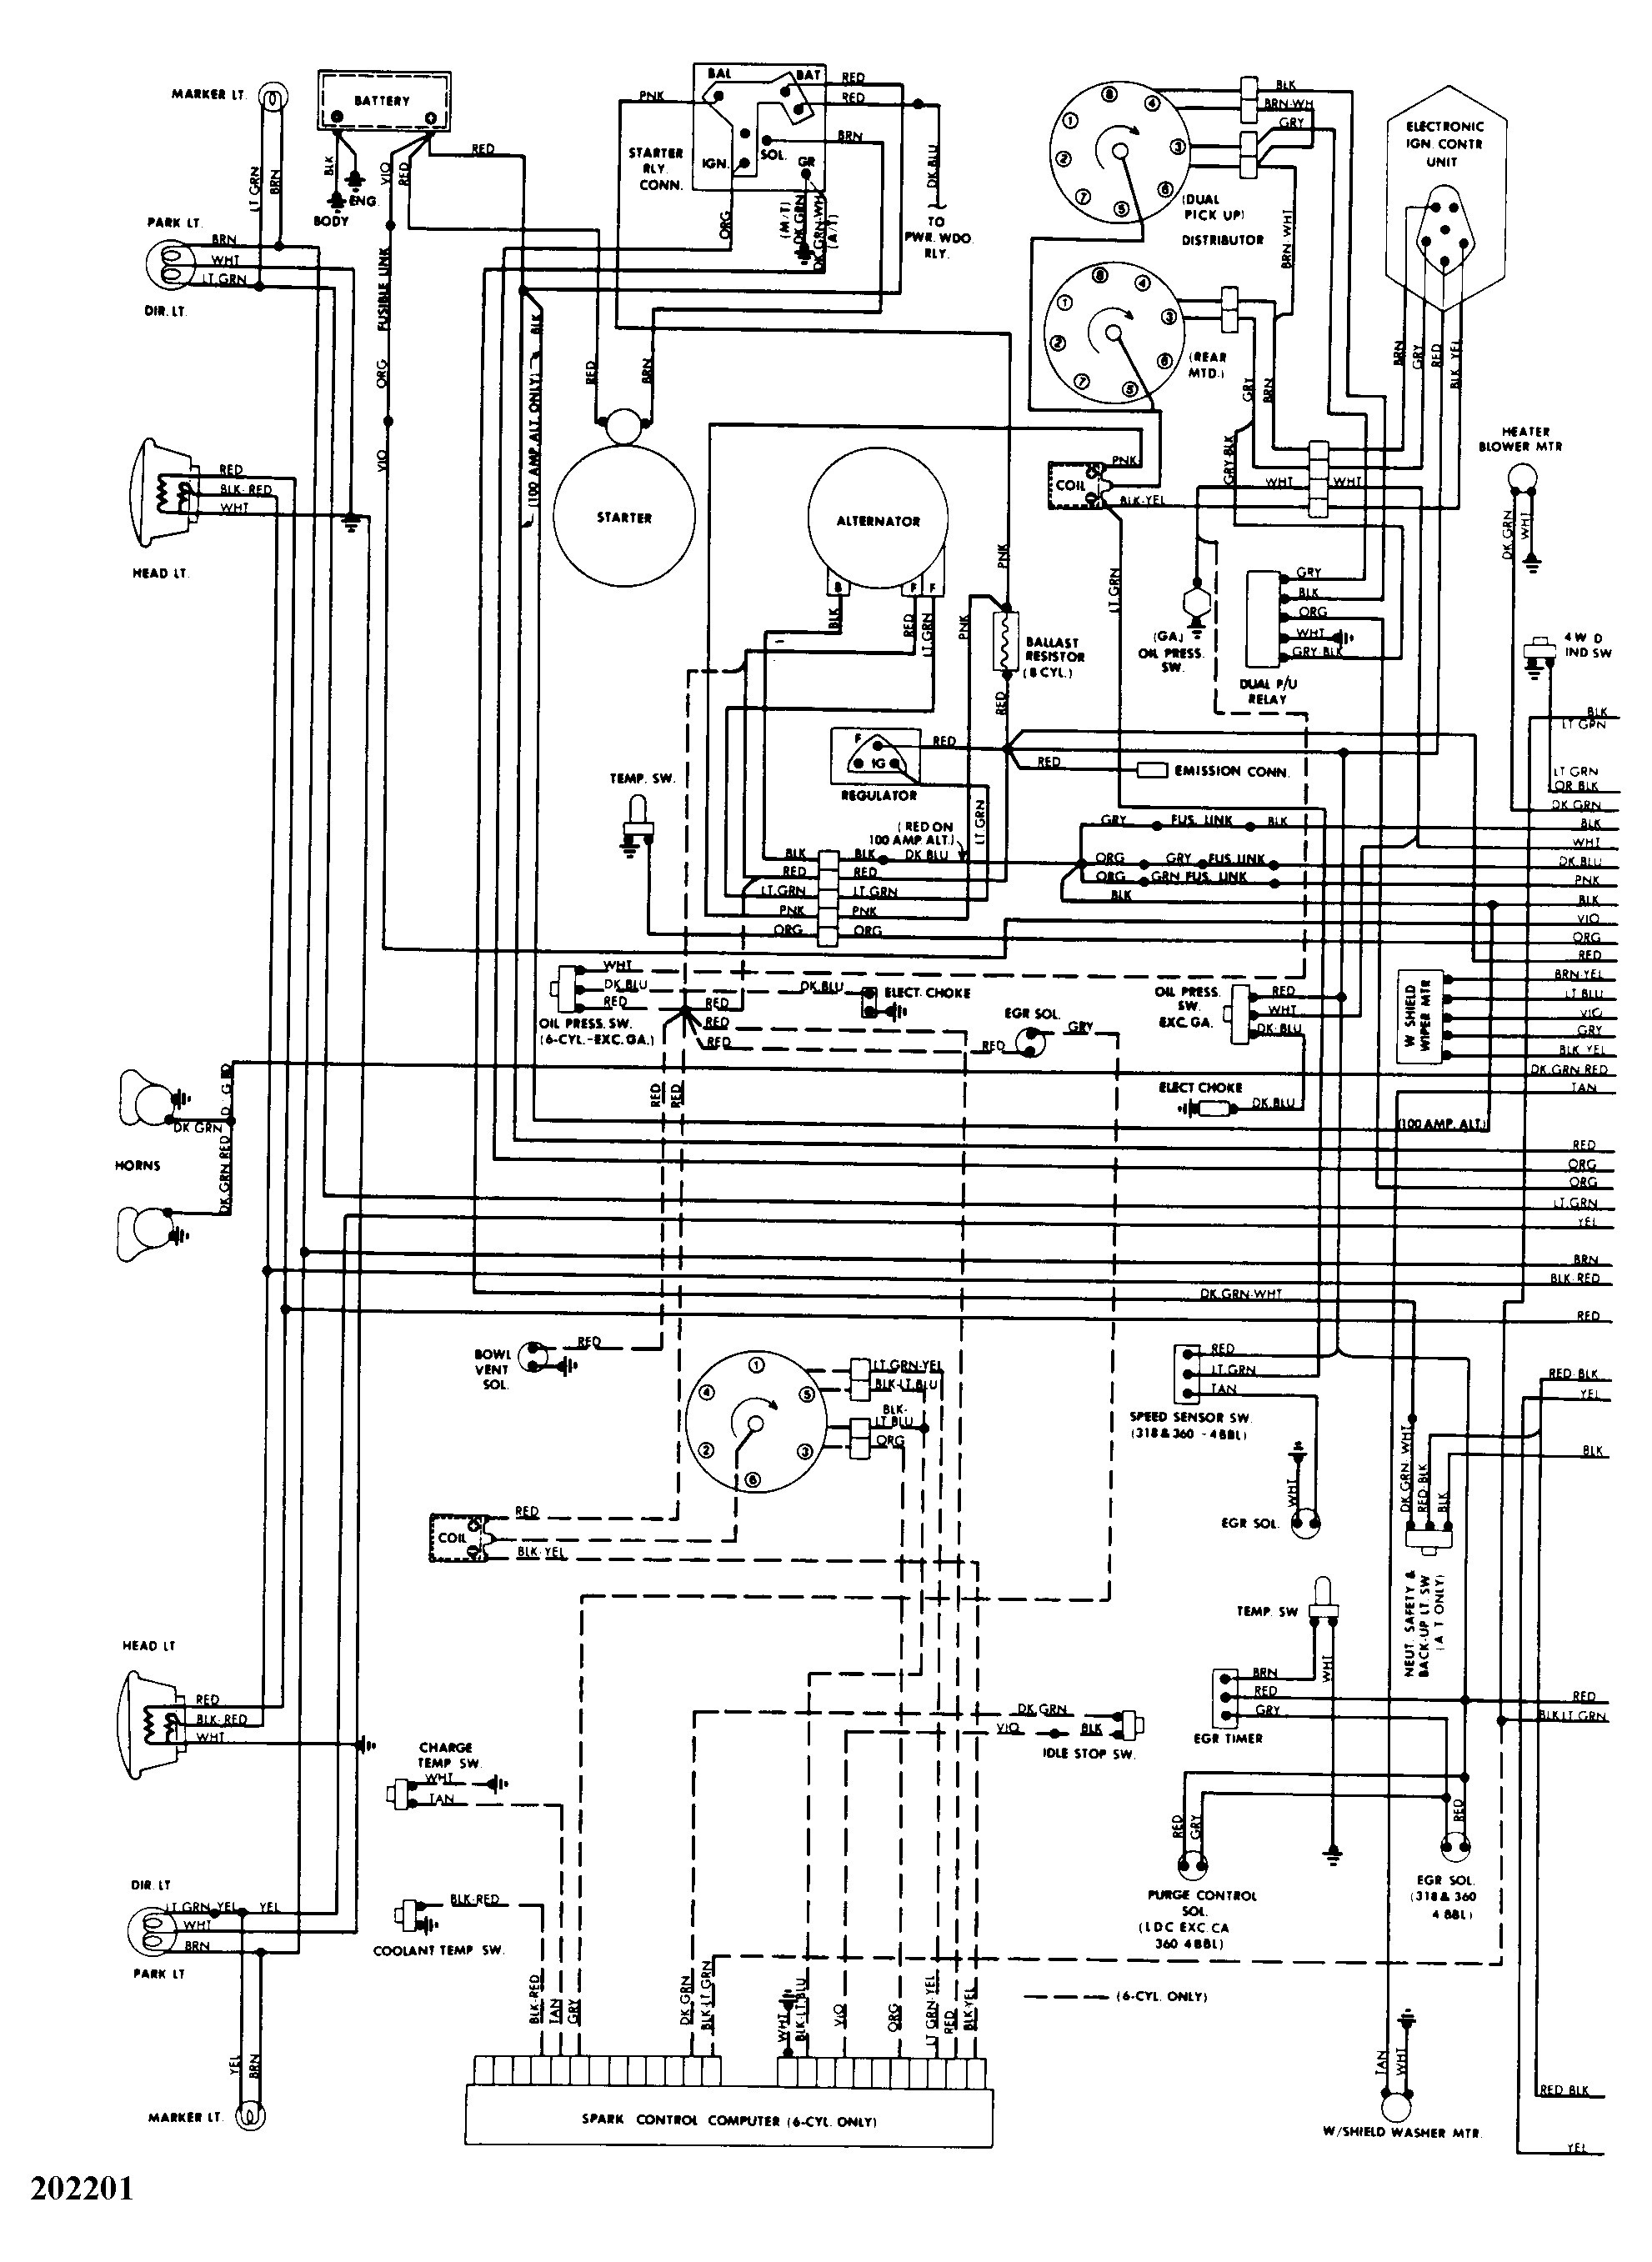 Dodge Electronic Ignition Wiring Diagram Unique Stunning Sprinter Ignition Switch Wiring Diagram